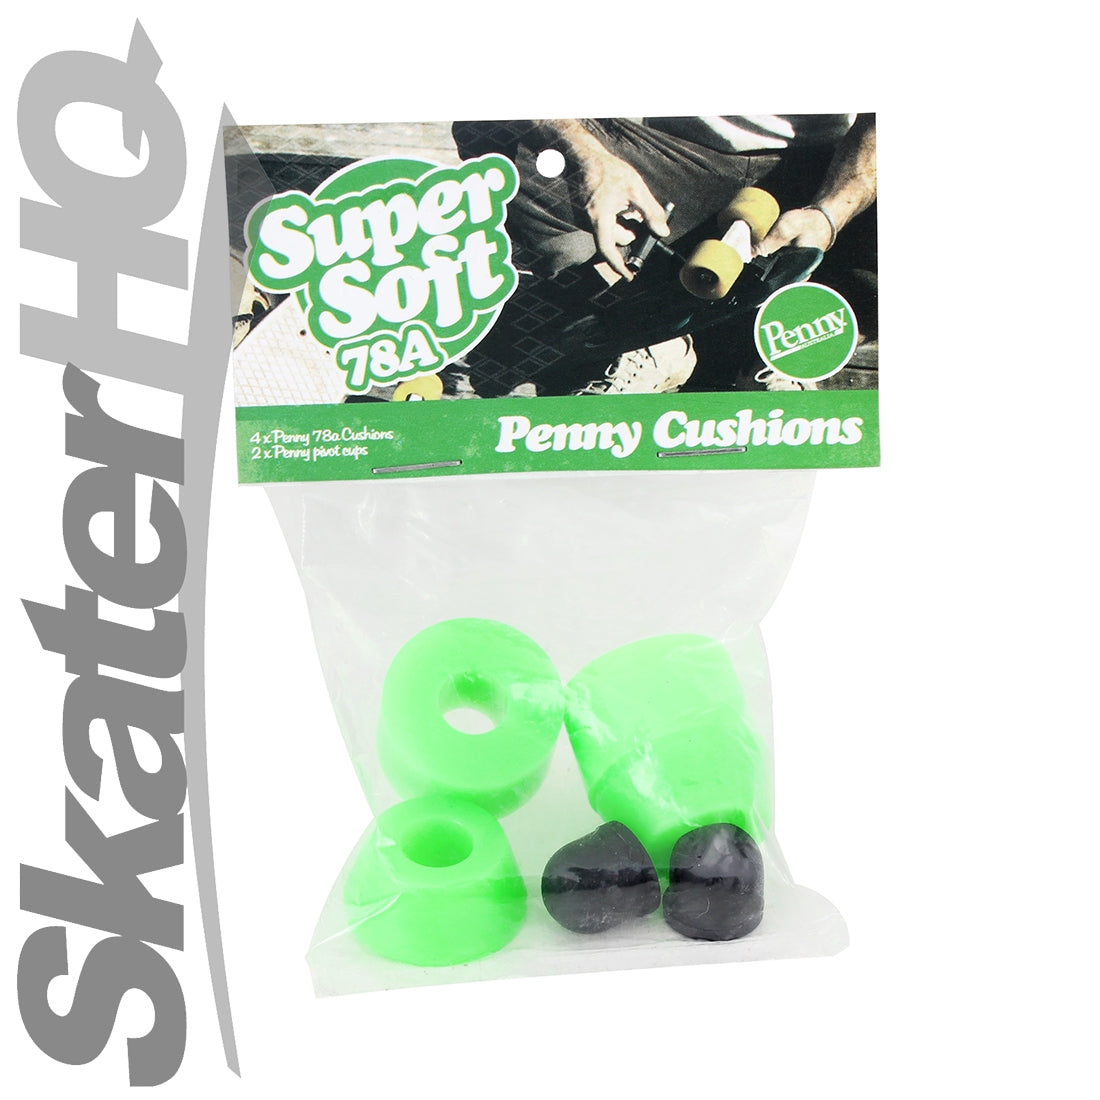 Penny Cushion Set - Super Soft 78a Green Skateboard Hardware and Parts